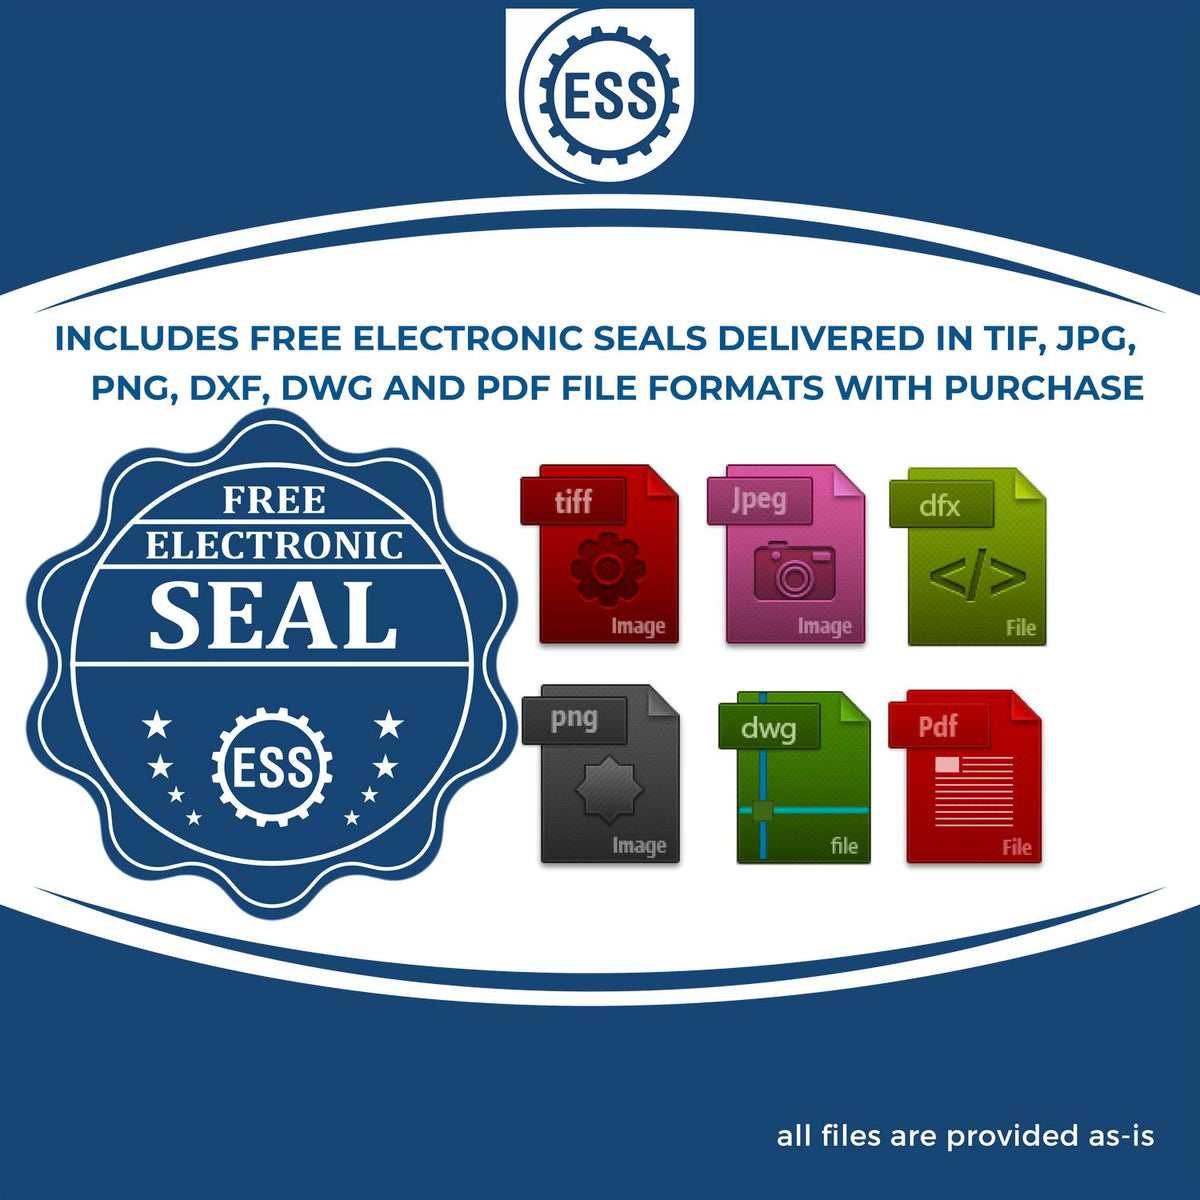 An infographic for the free electronic seal for the Self-Inking Rectangular Illinois Notary Stamp illustrating the different file type icons such as DXF, DWG, TIF, JPG and PNG.